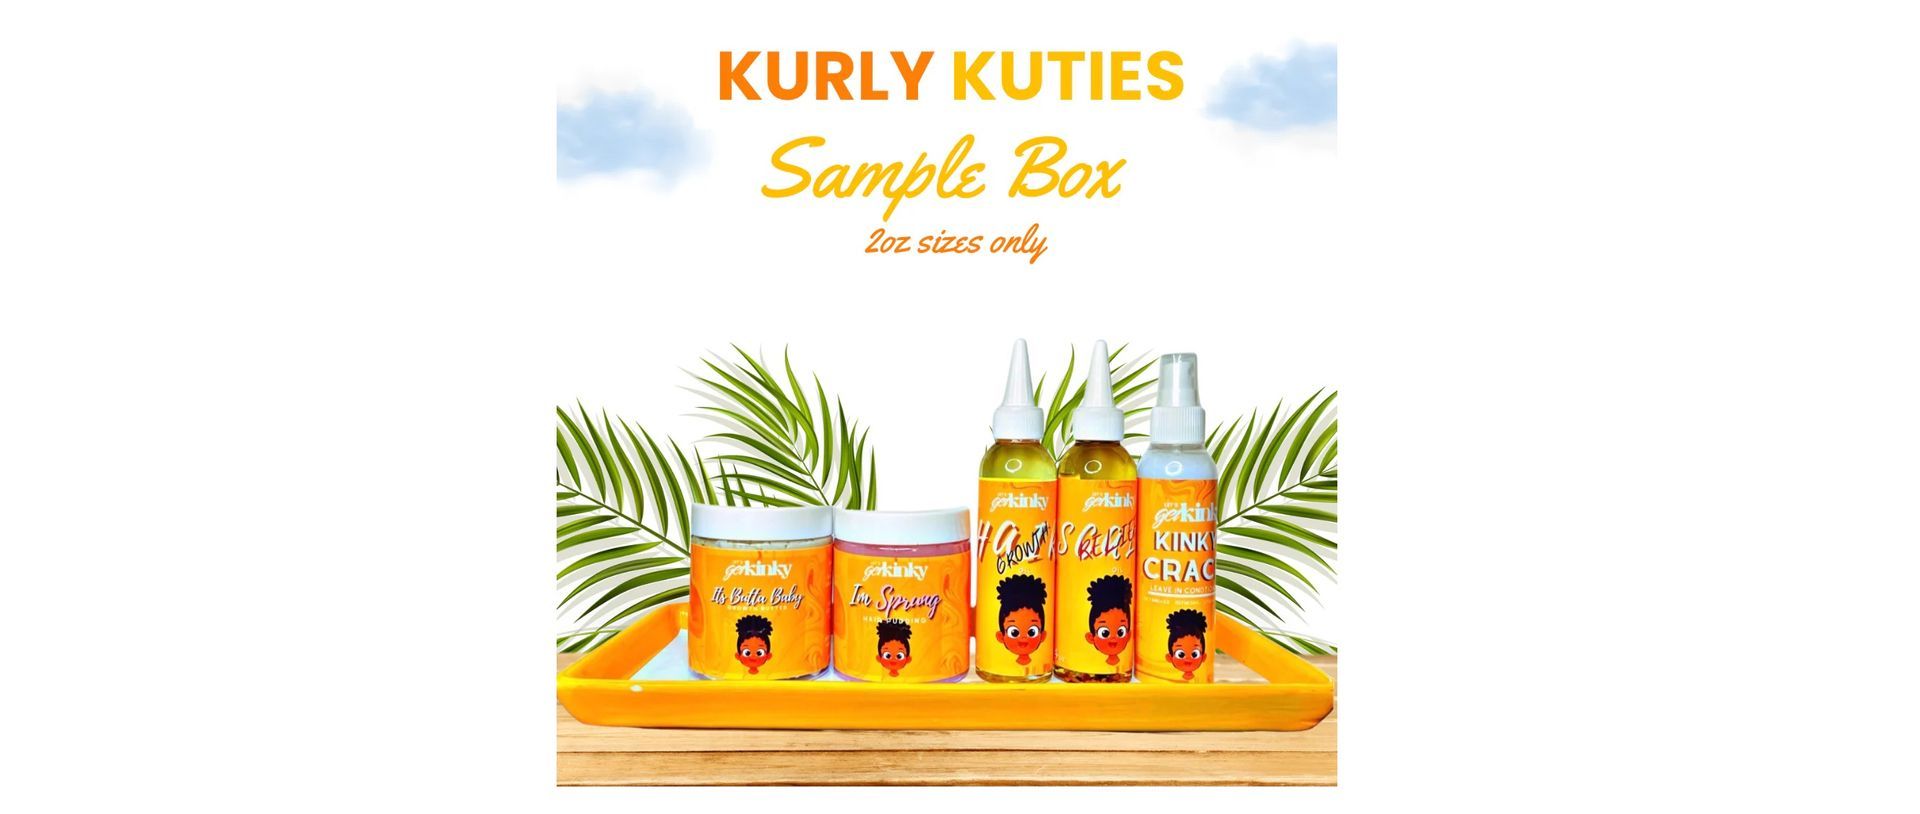 a sample box for kurly kuties hair products